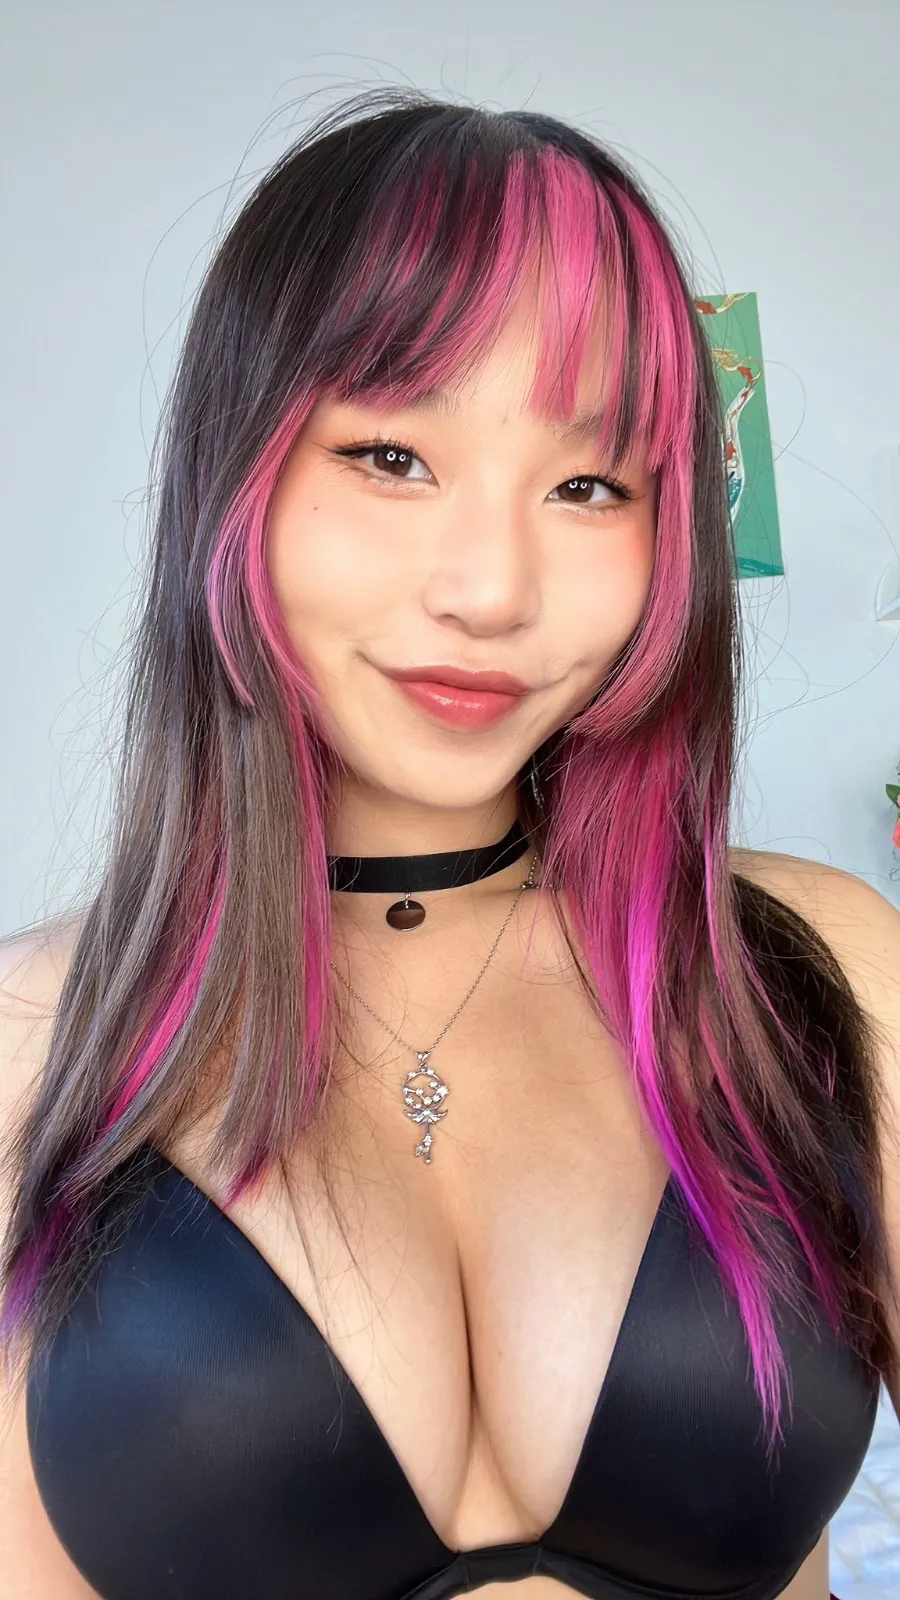 I am Asian 👩Juicy Hot 🔥Sexy💕always available for **** Hardcore🥰,69,****,💋br